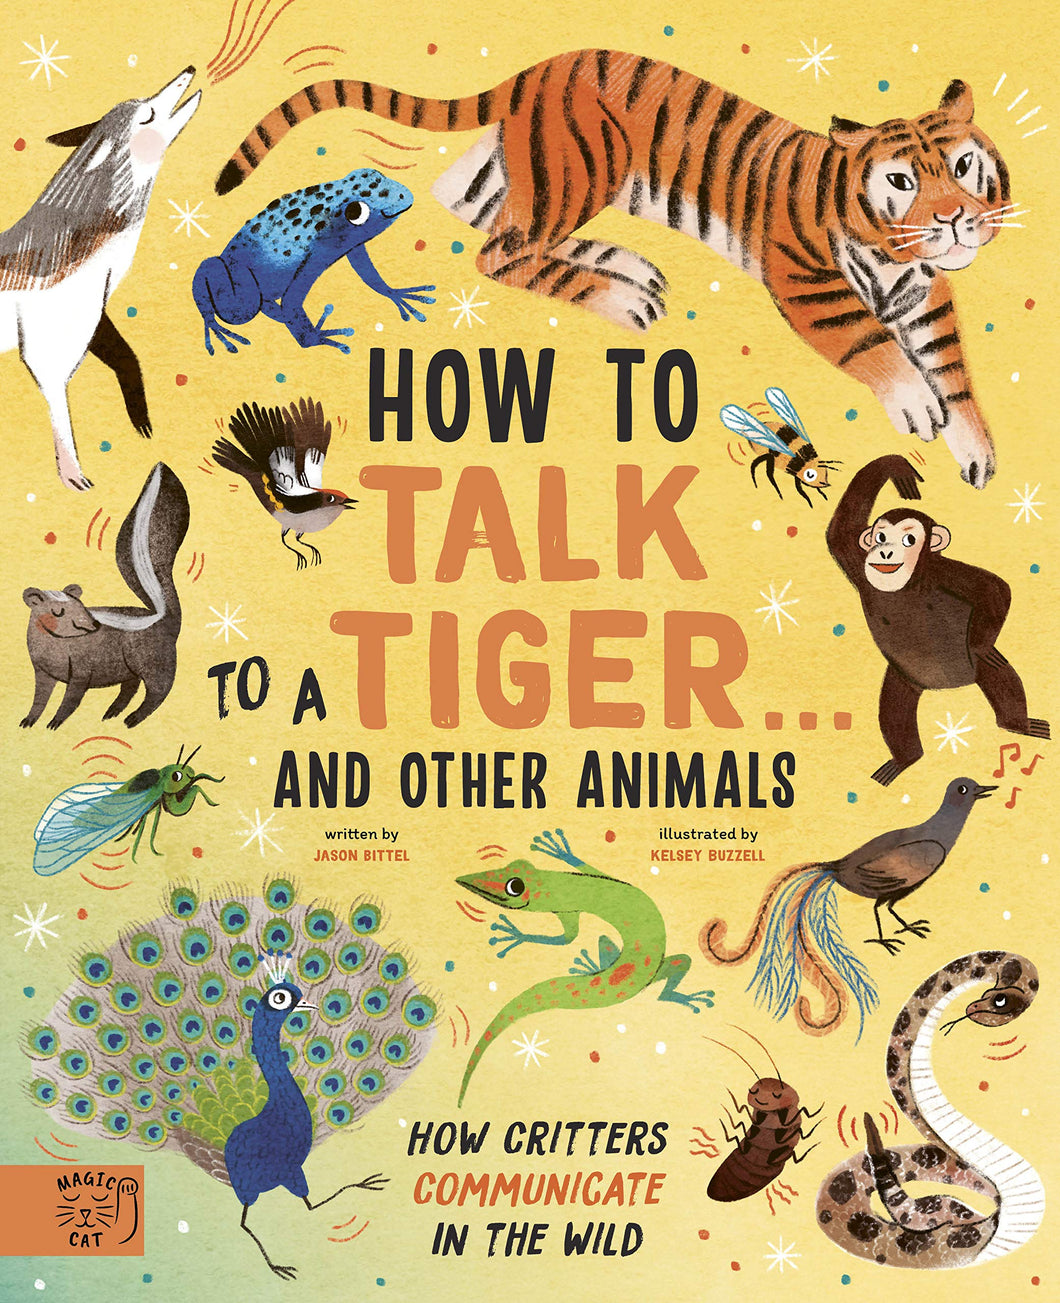 How to Talk to a Tiger… and other animals: How Critters Communicate in the Wild